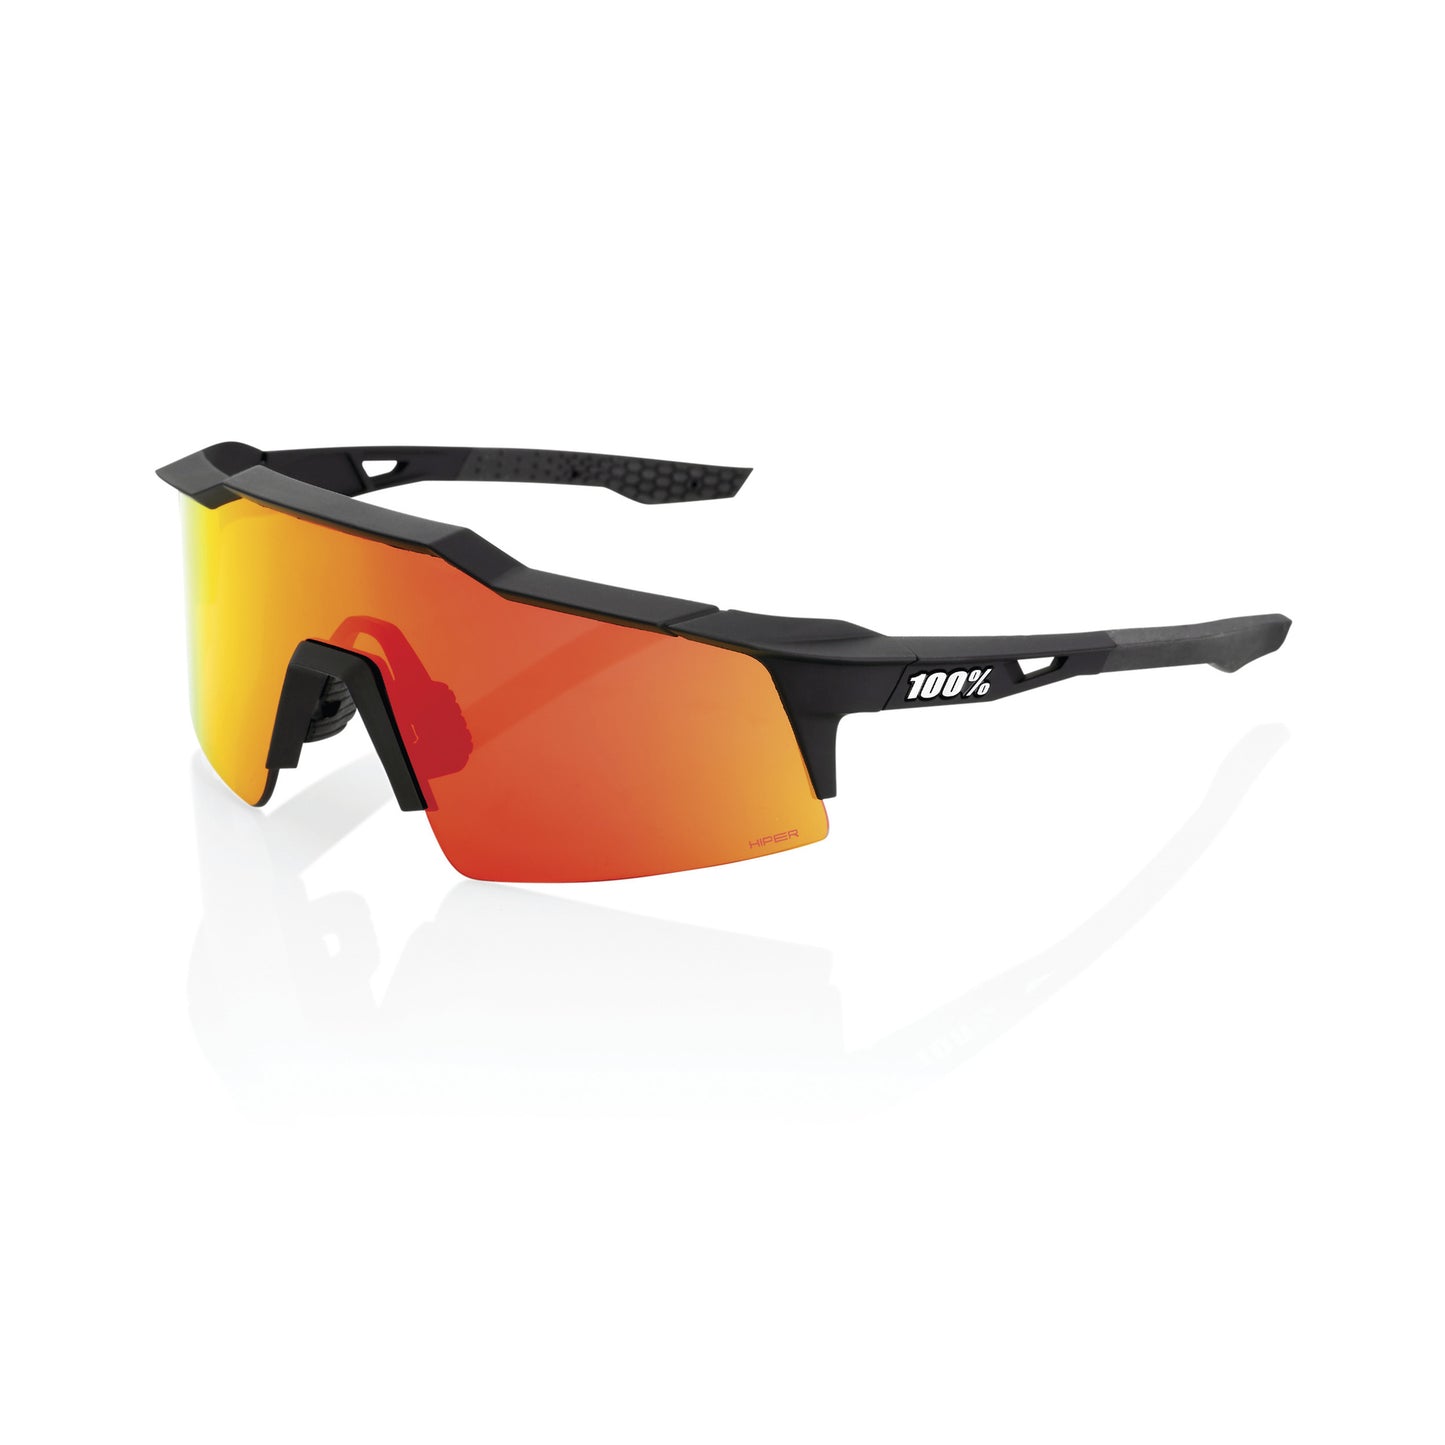 100 Percent Speedcraft Sl Sunglasses - One Size Fits Most - Soft Tact Black - HiPER Red Mirror Lens - Image 1